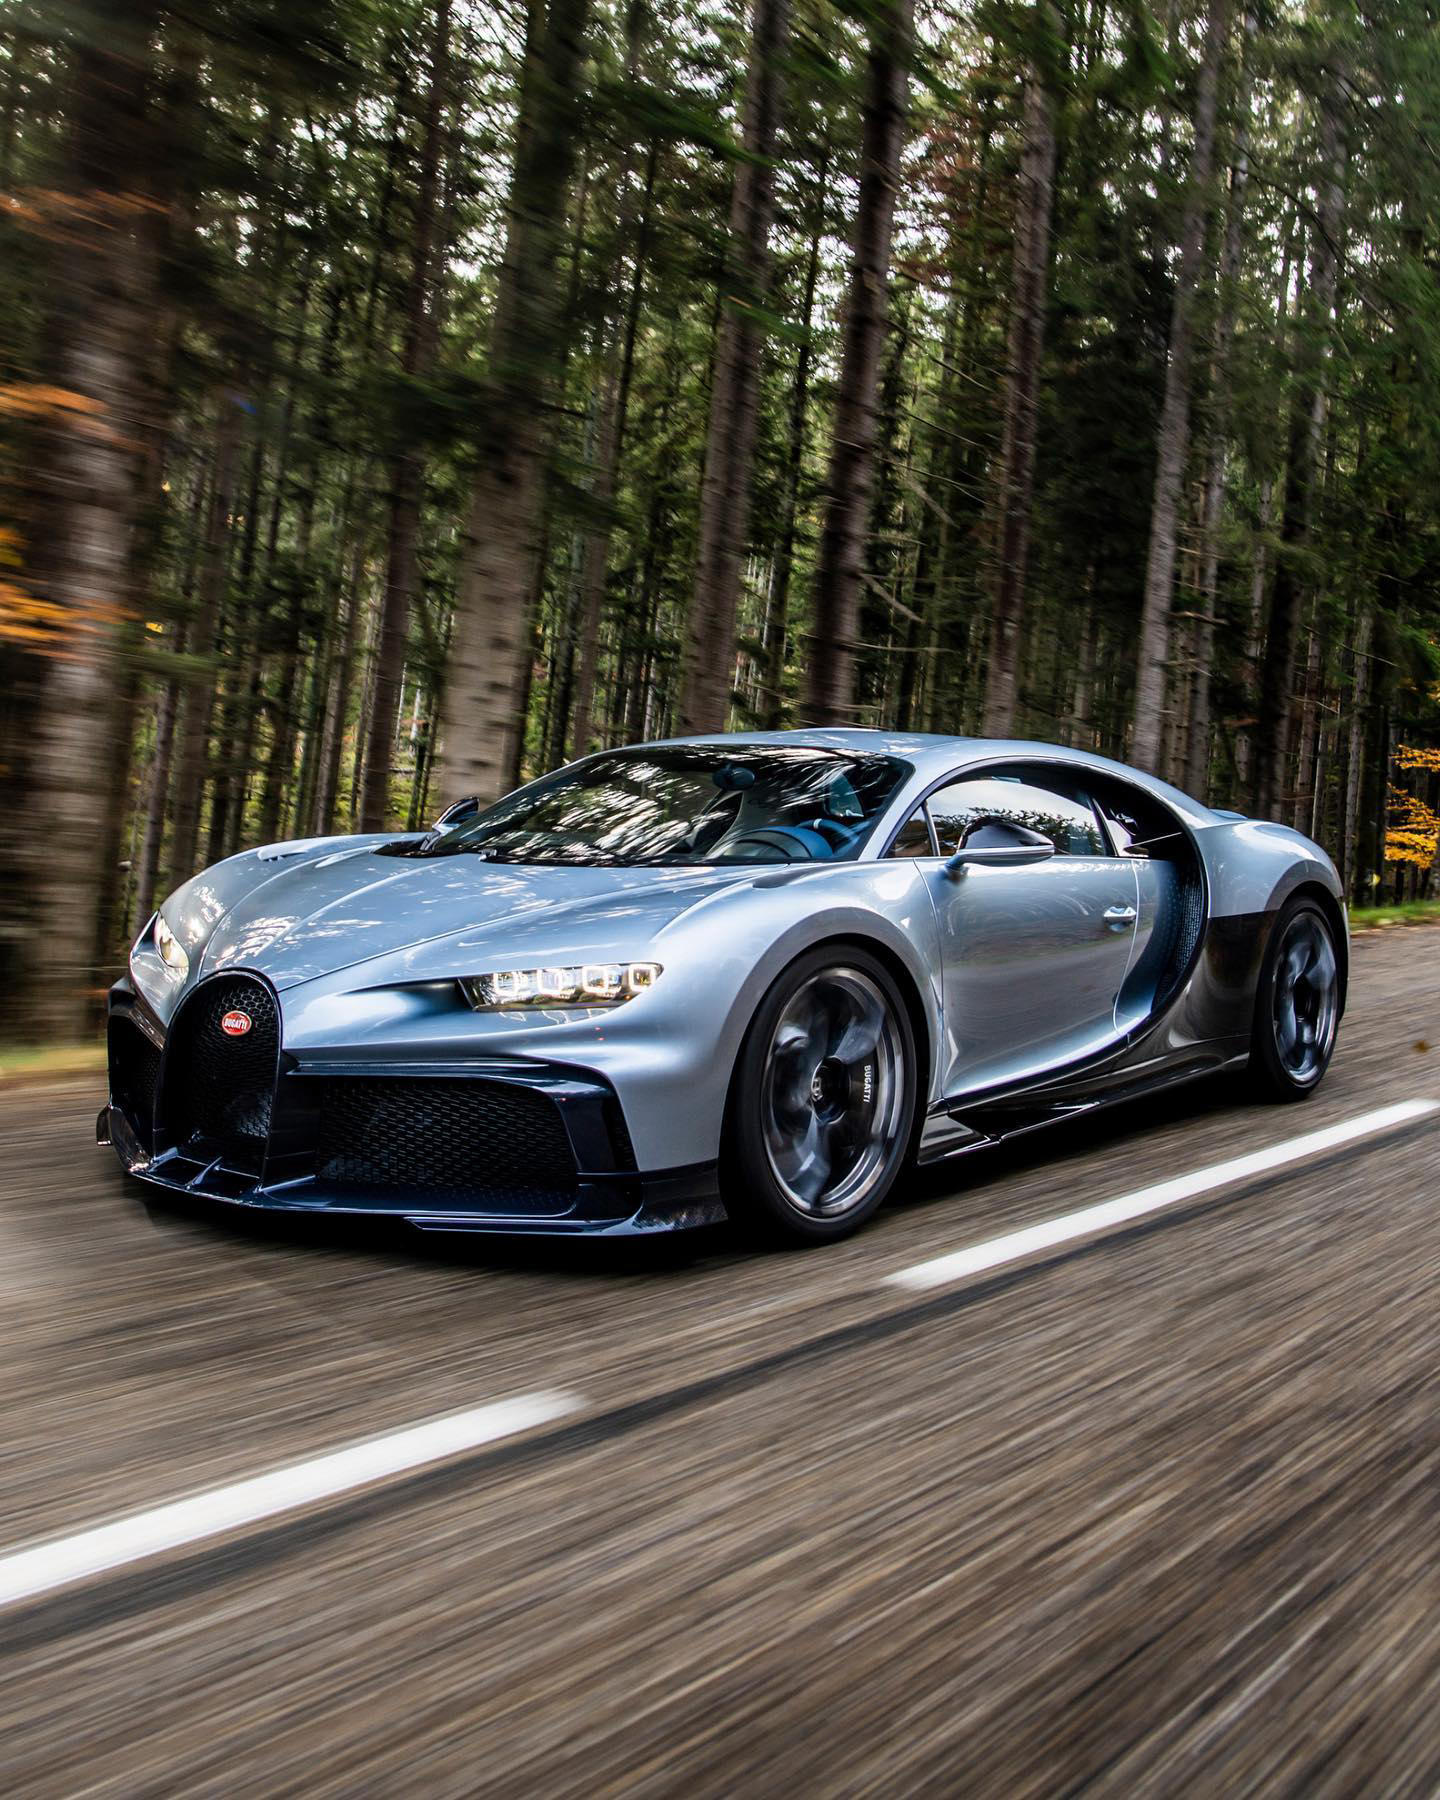 The CHIRON Profilée is the optimum BUGATTI to glide around corners and power across fast straights w